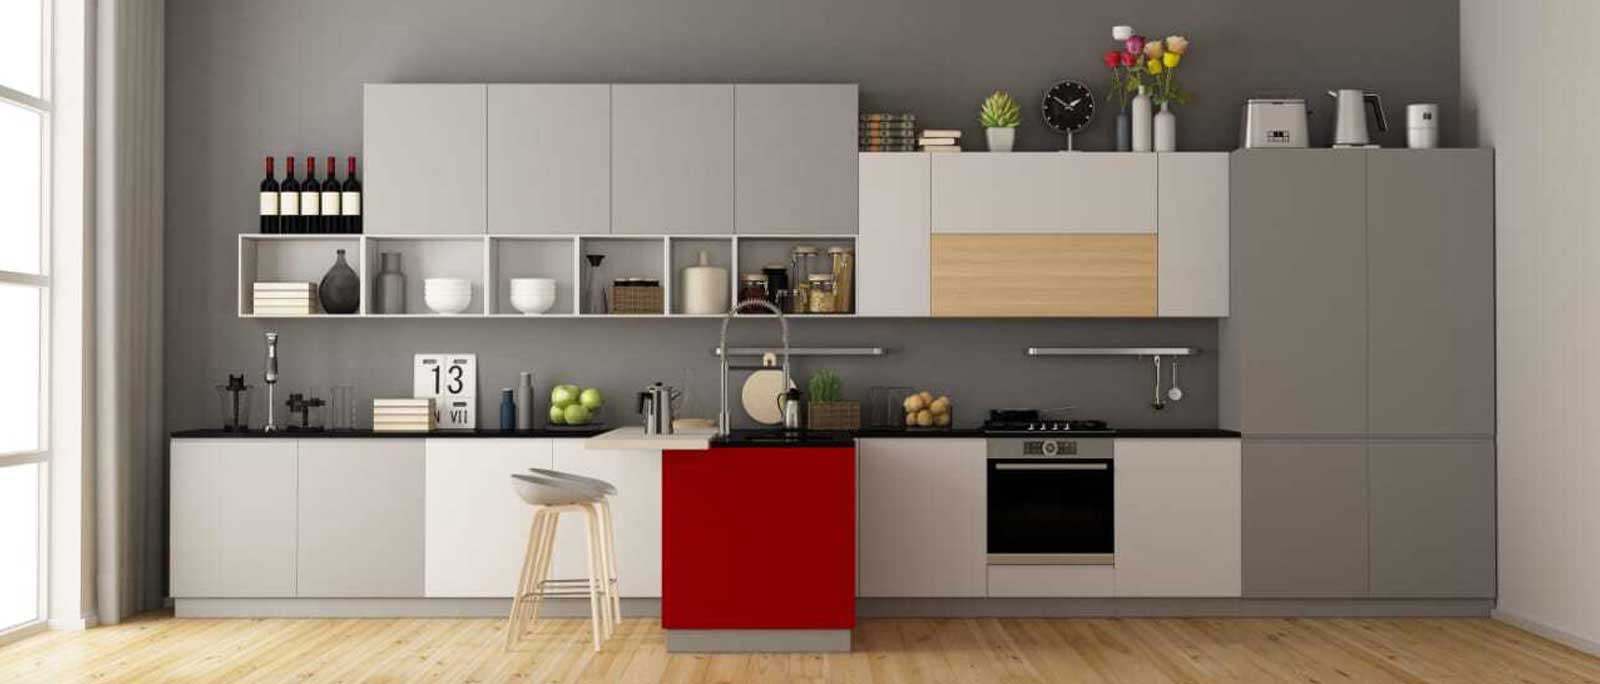 Five Easy Steps to Clean and Maintain Your Modular Kitchen as New as Ever!